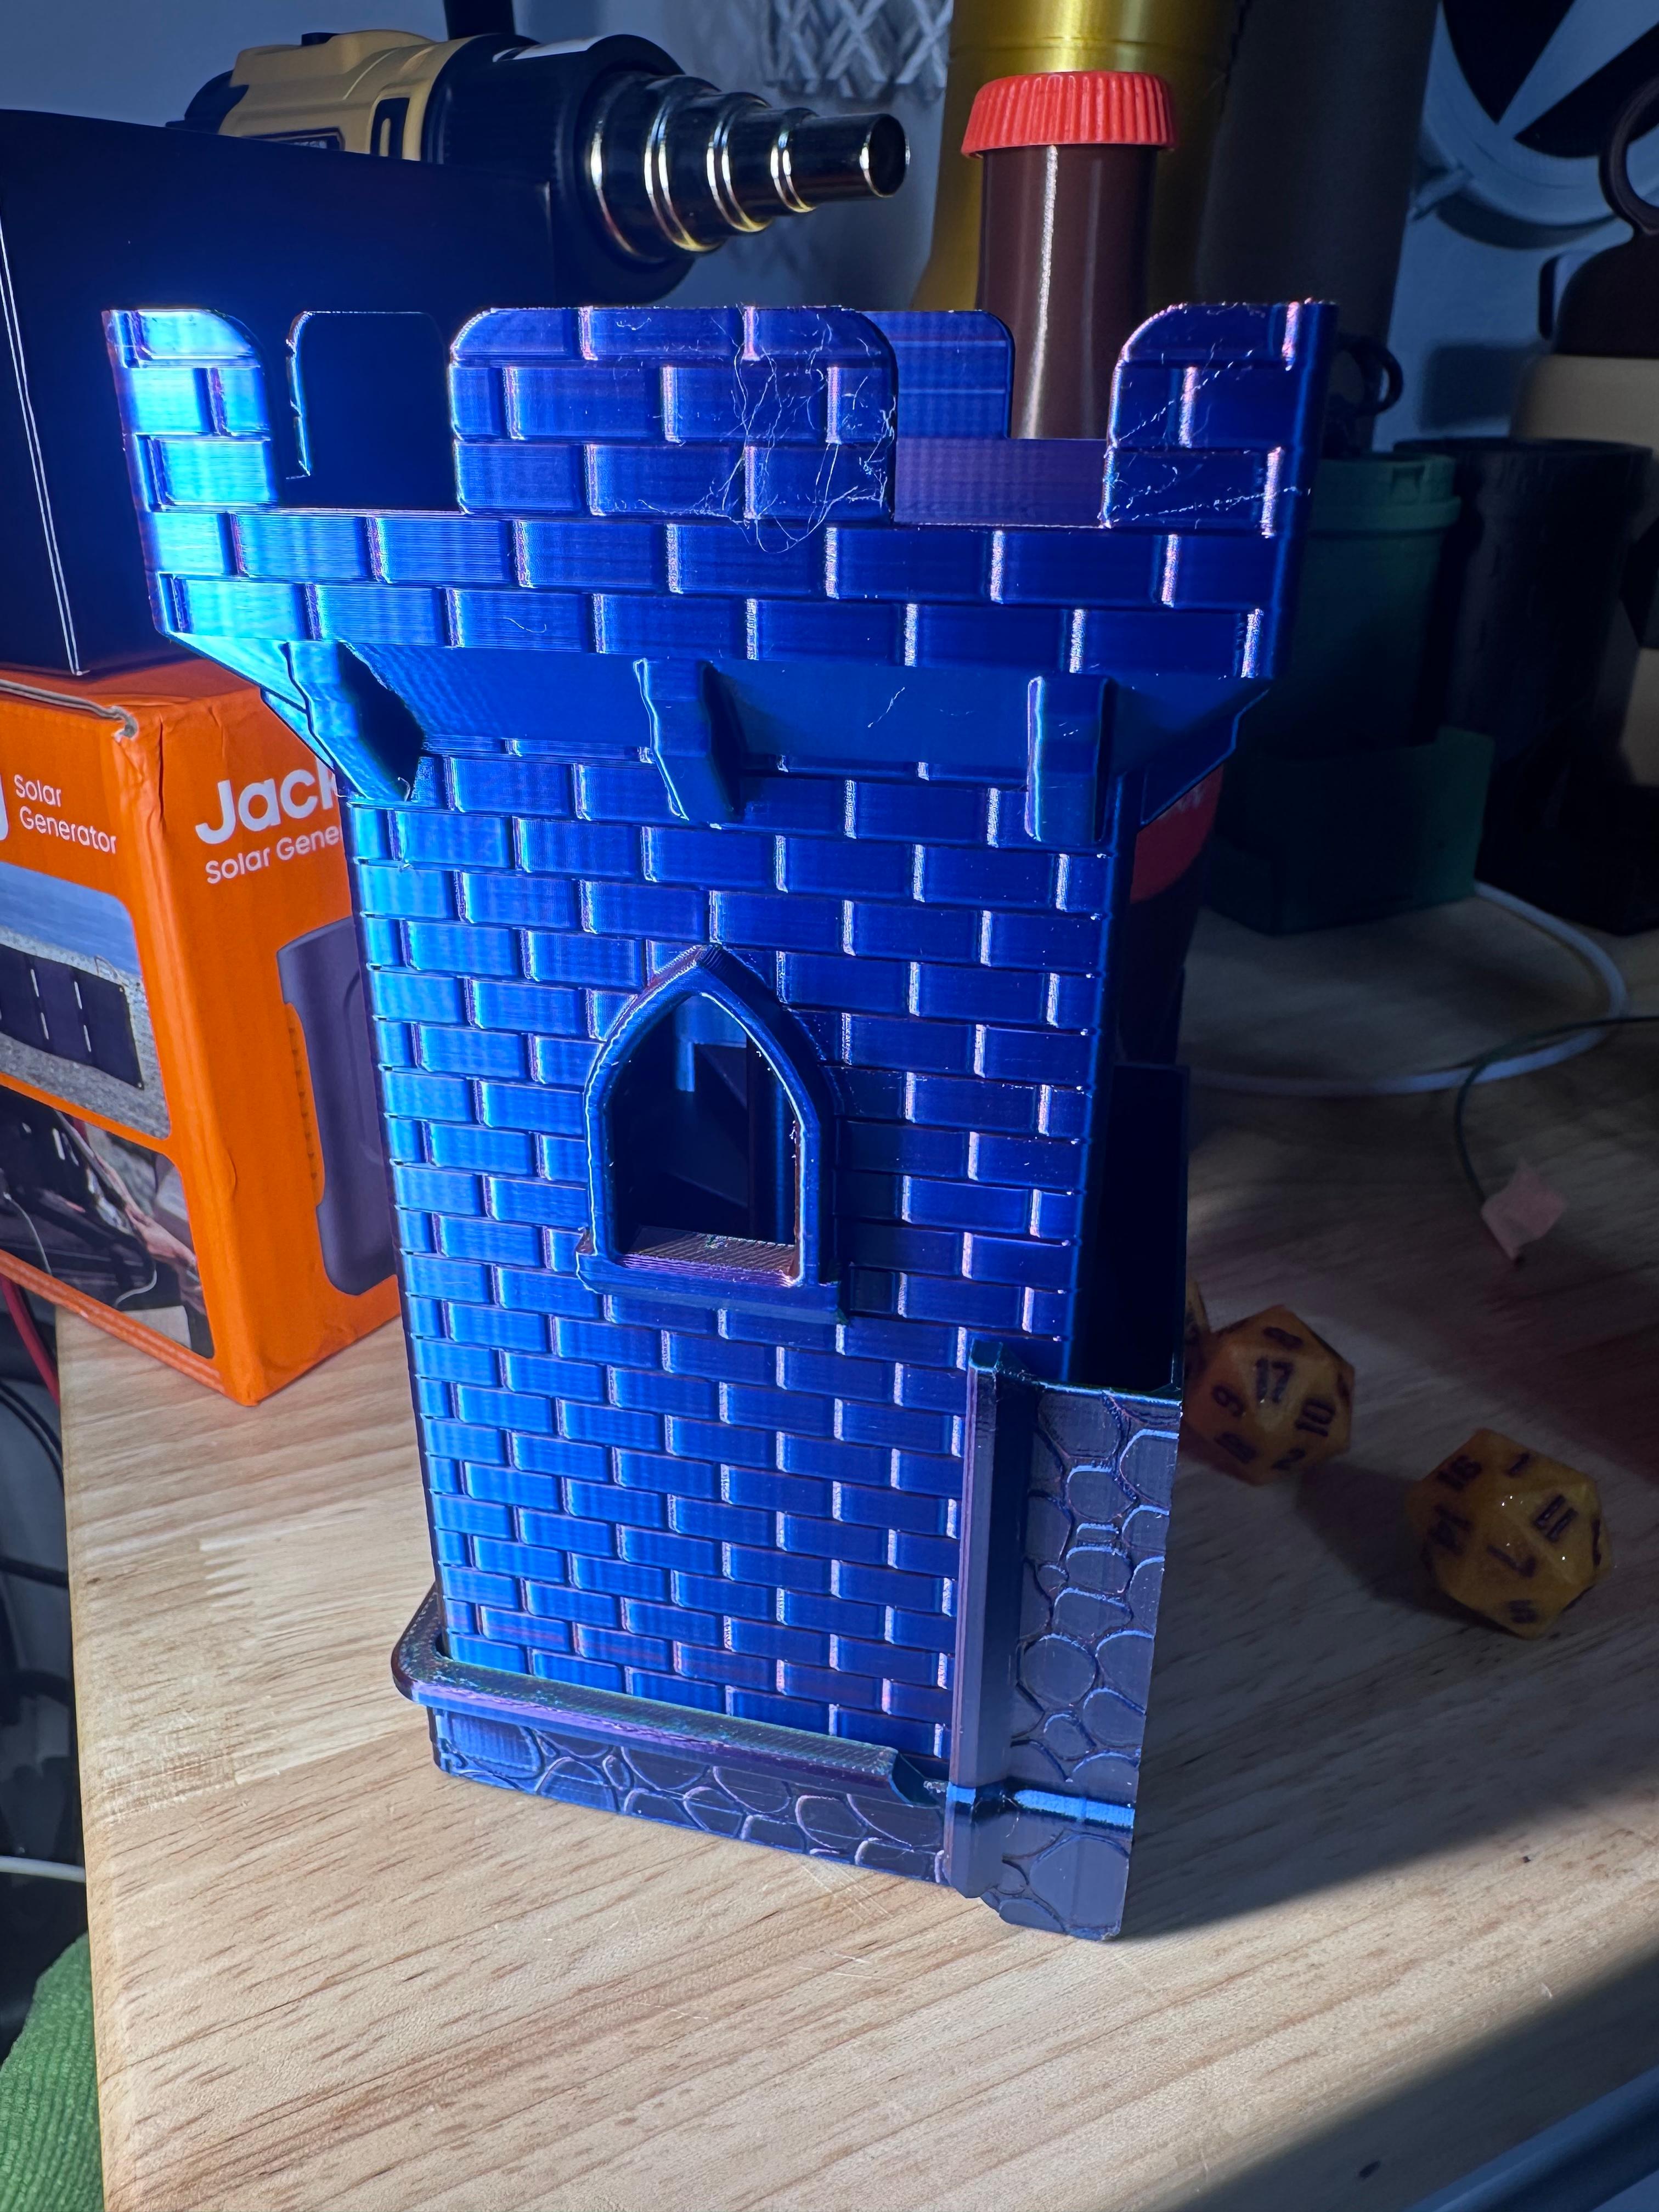 ROOK PORTABLE DICE TOWER FOR GAME NIGHT. LIGHTWEIGHT, FUN, DUNGEONS AND DRAGONS, WARCRAFT 3d model